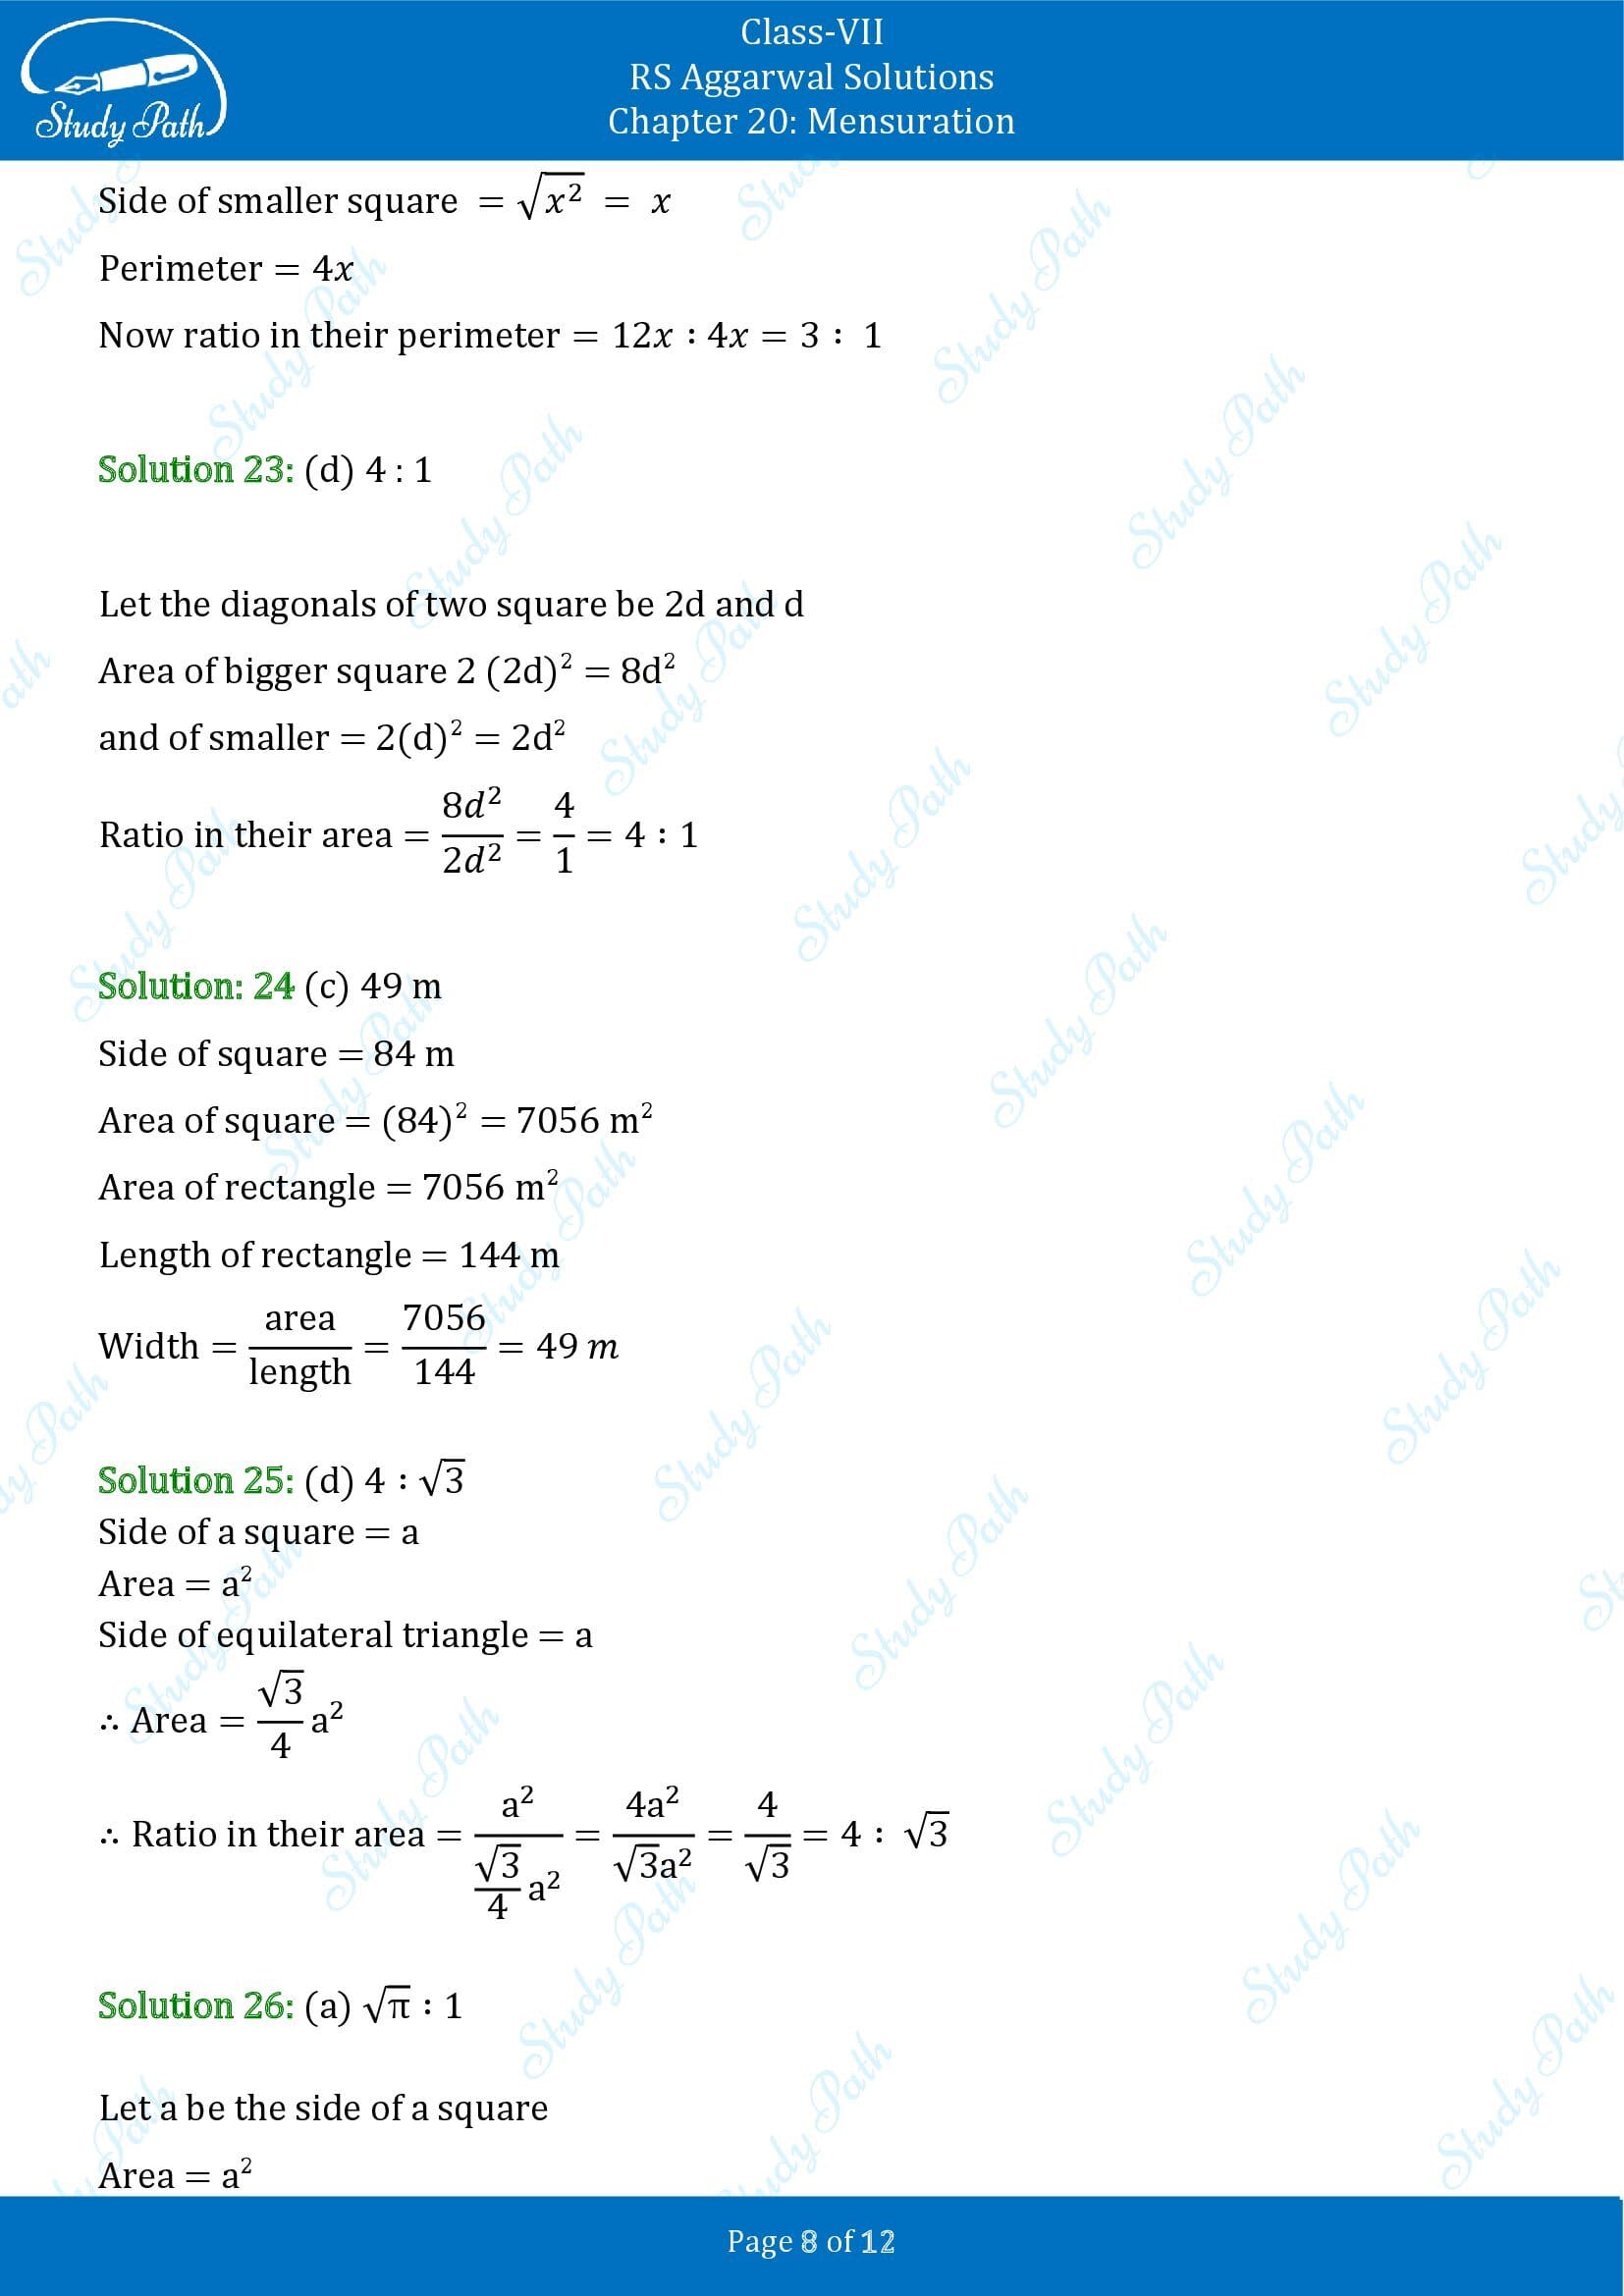 RS Aggarwal Solutions Class 7 Chapter 20 Mensuration Exercise 20G MCQ 00008